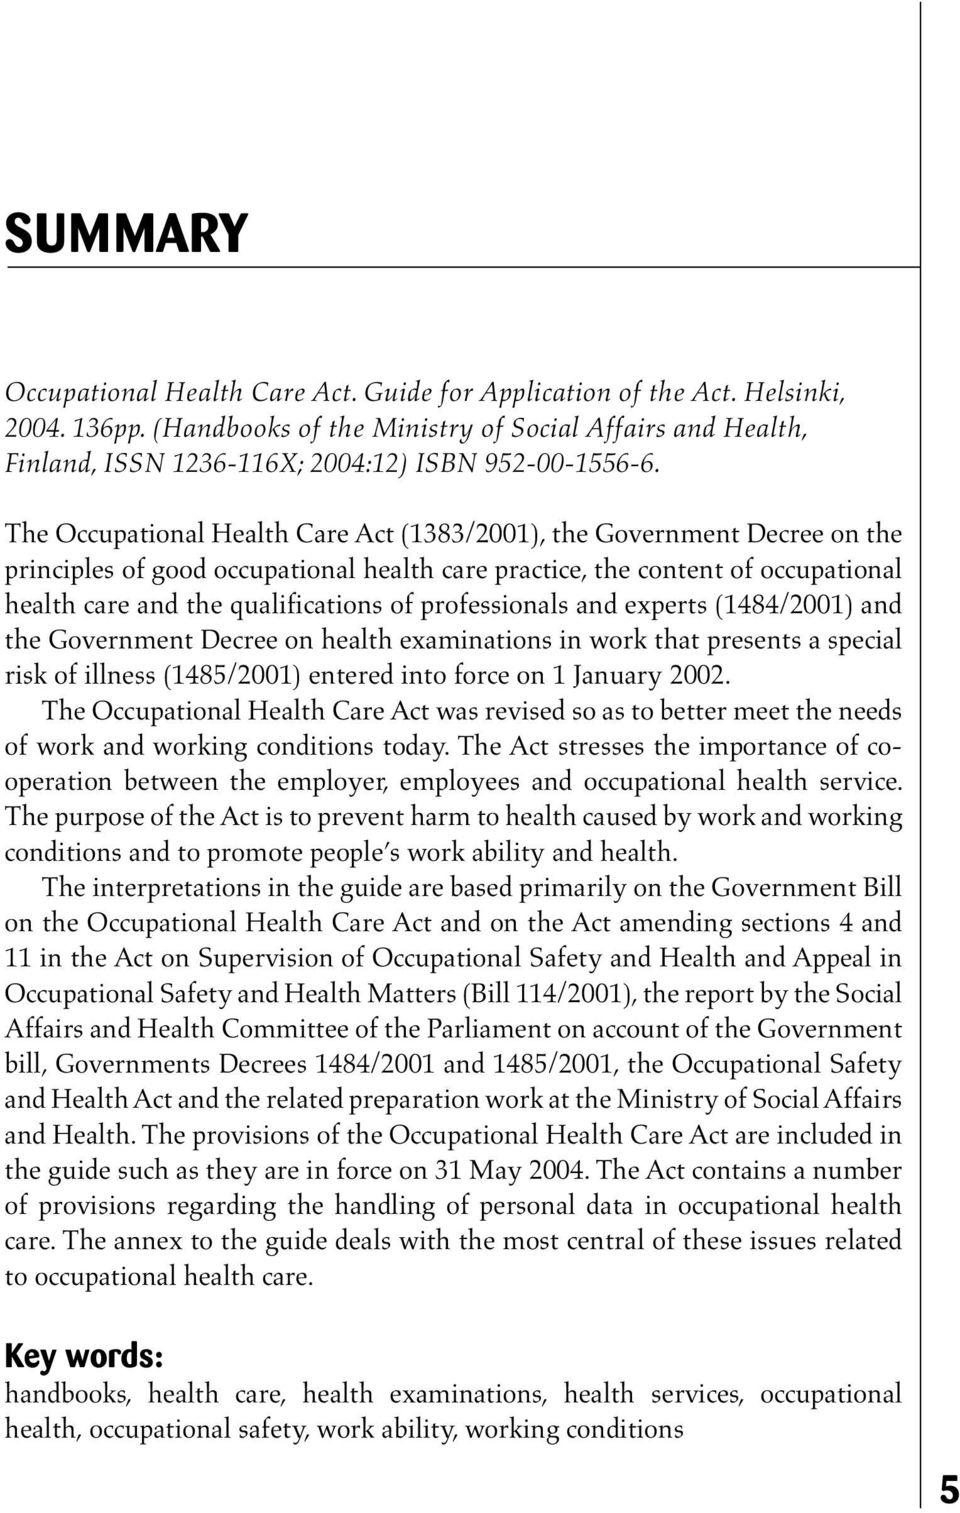 The Occupational Health Care Act (1383/2001), the Government Decree on the principles of good occupational health care practice, the content of occupational health care and the qualifications of